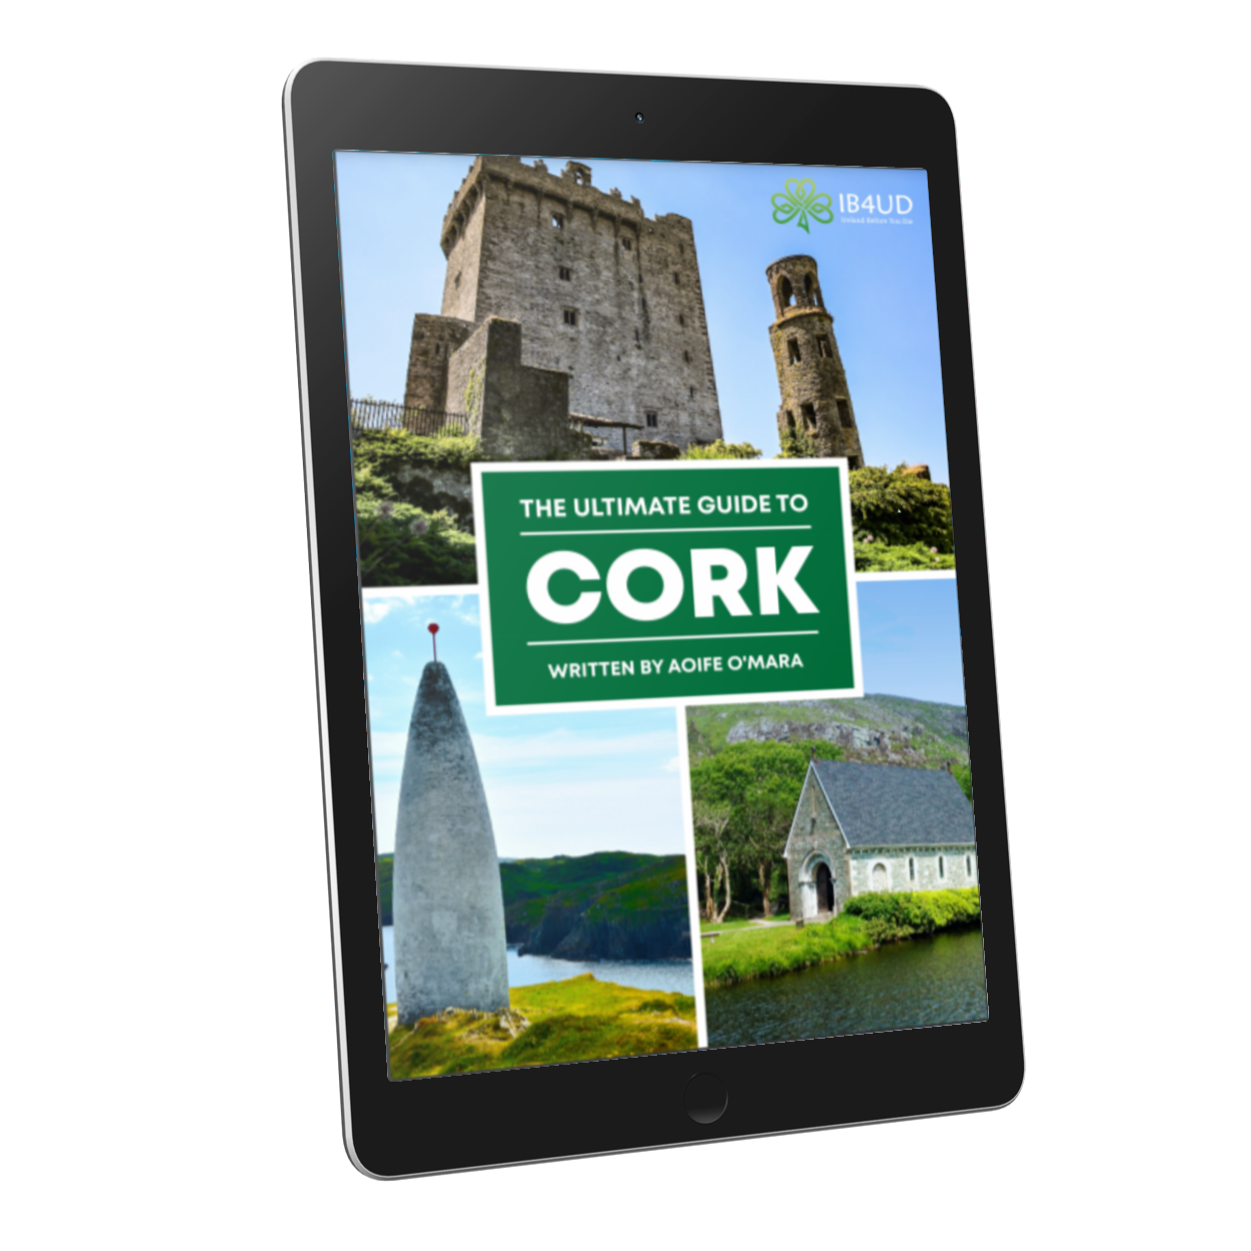 The Ultimate Guide to Cork (eBook)